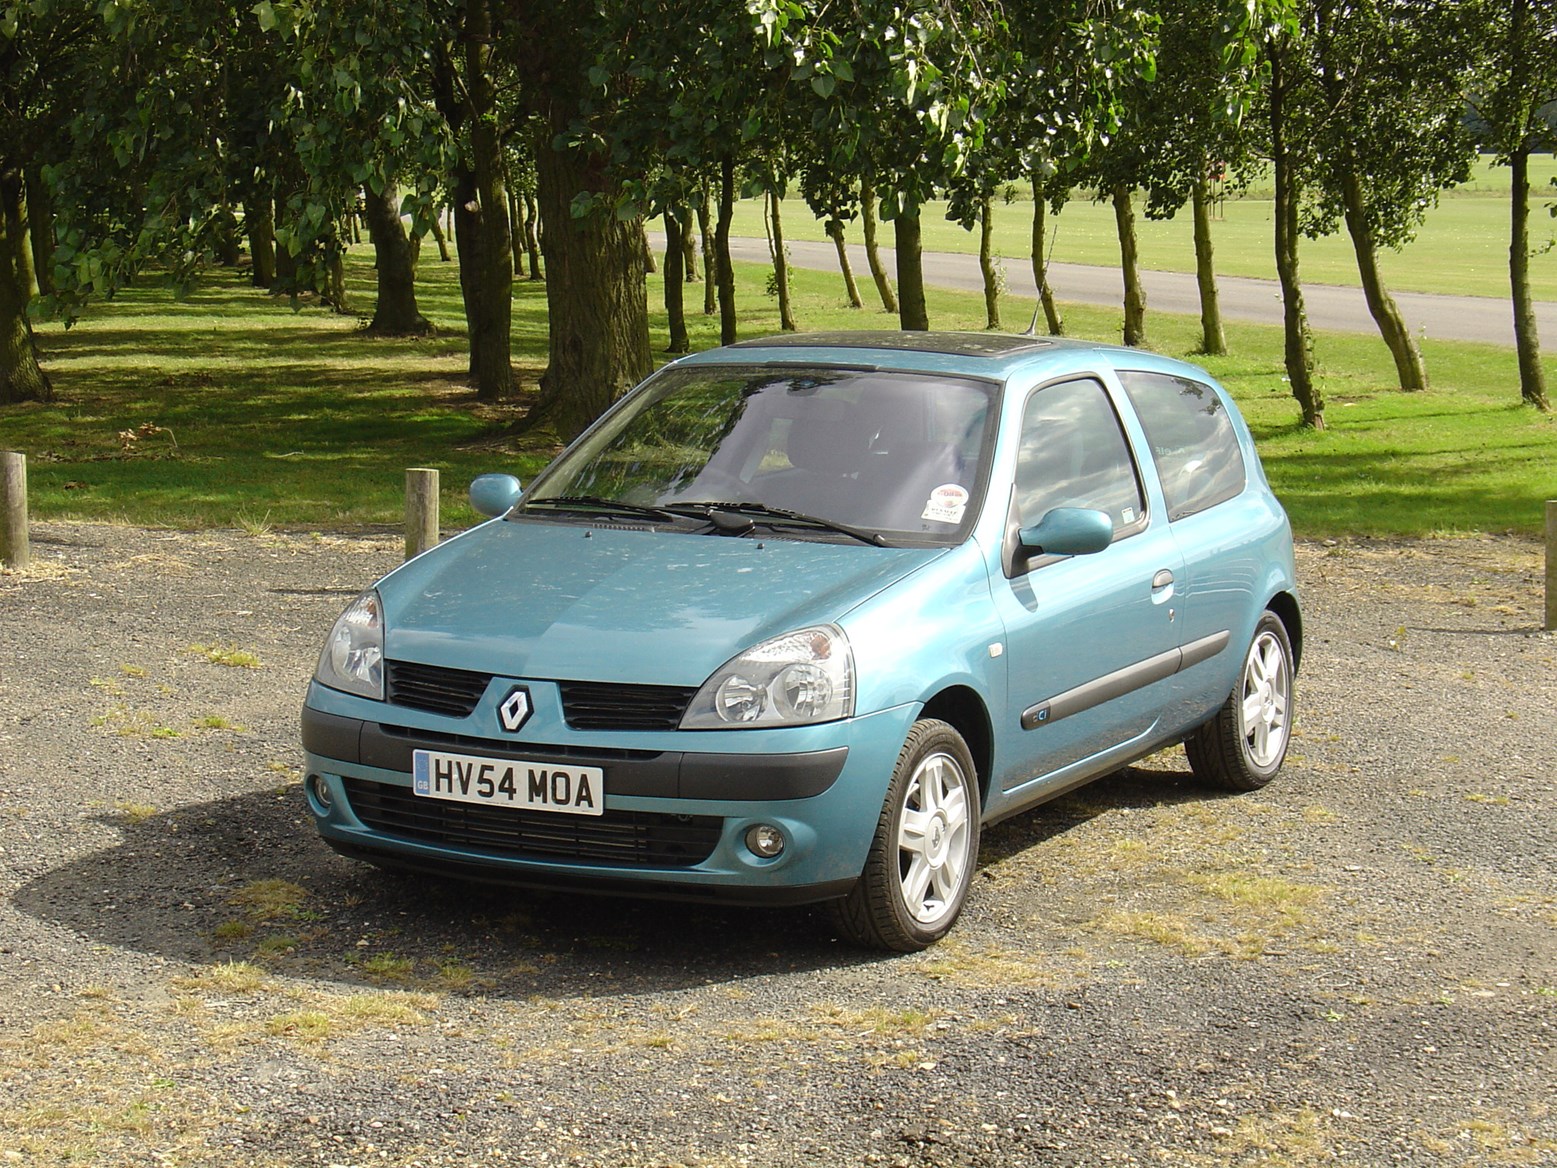 Used Renault Clio Hatchback 2001 2008 Review Parkers